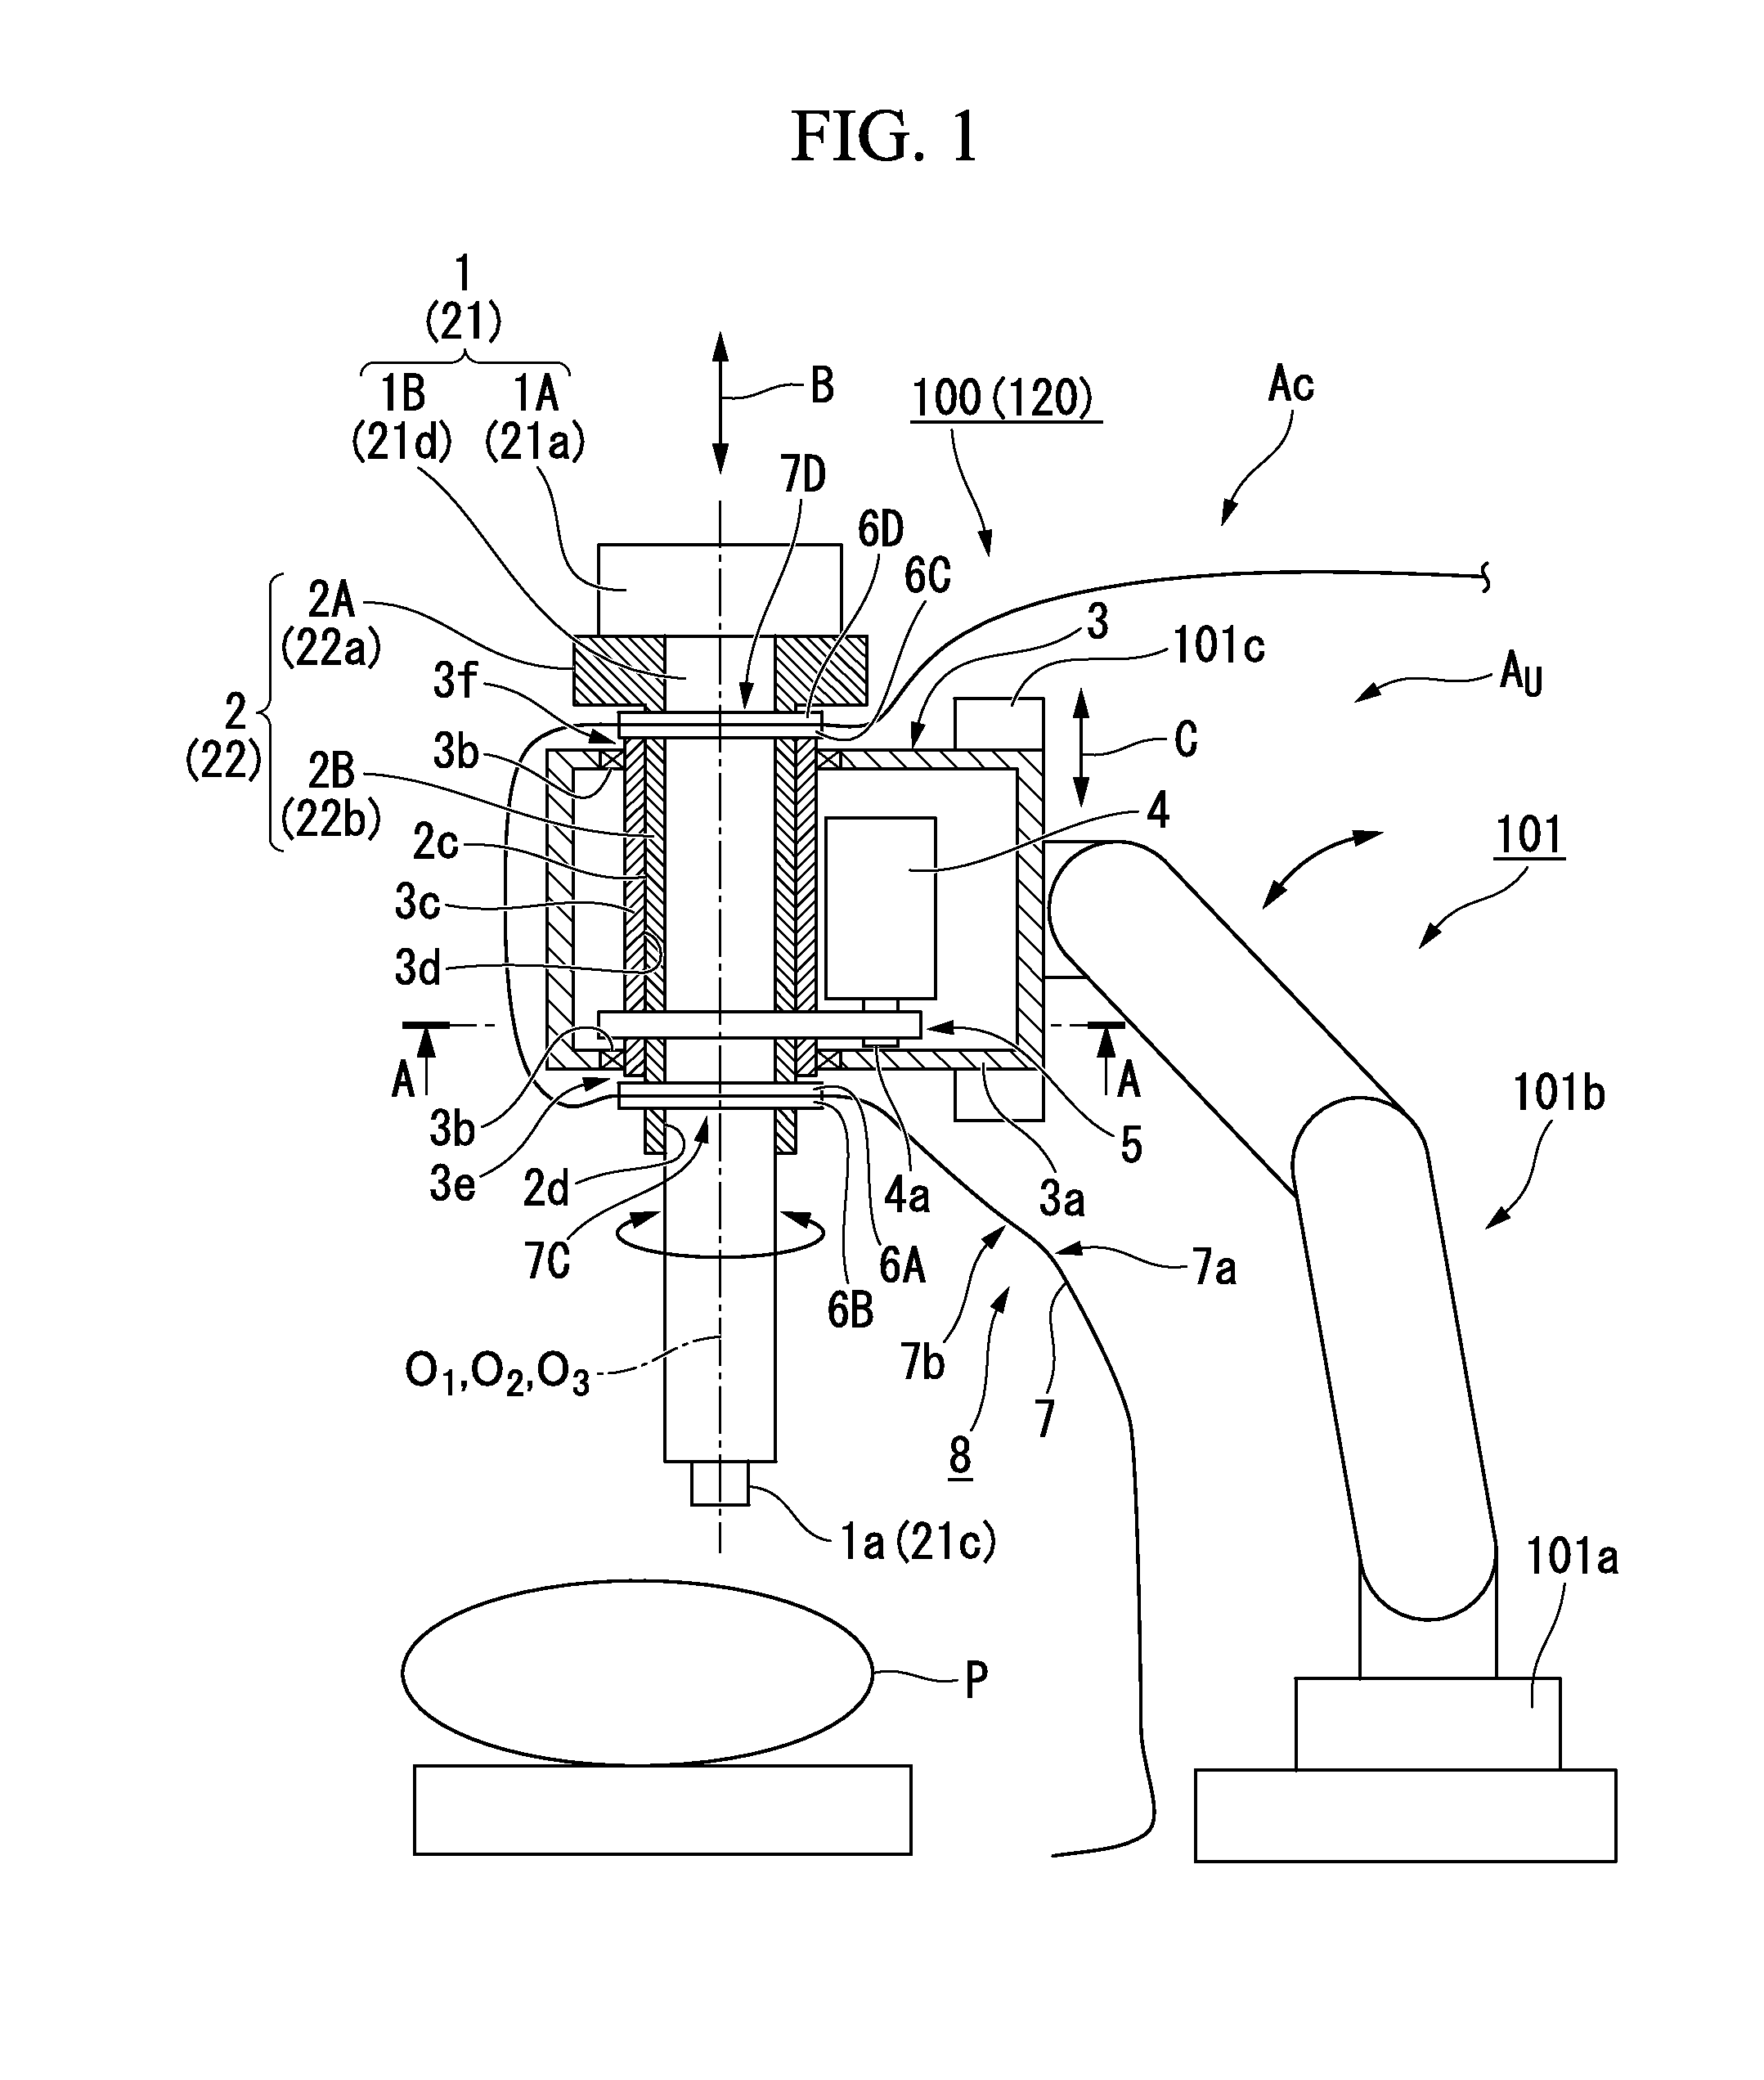 Operation support device and assembly method thereof